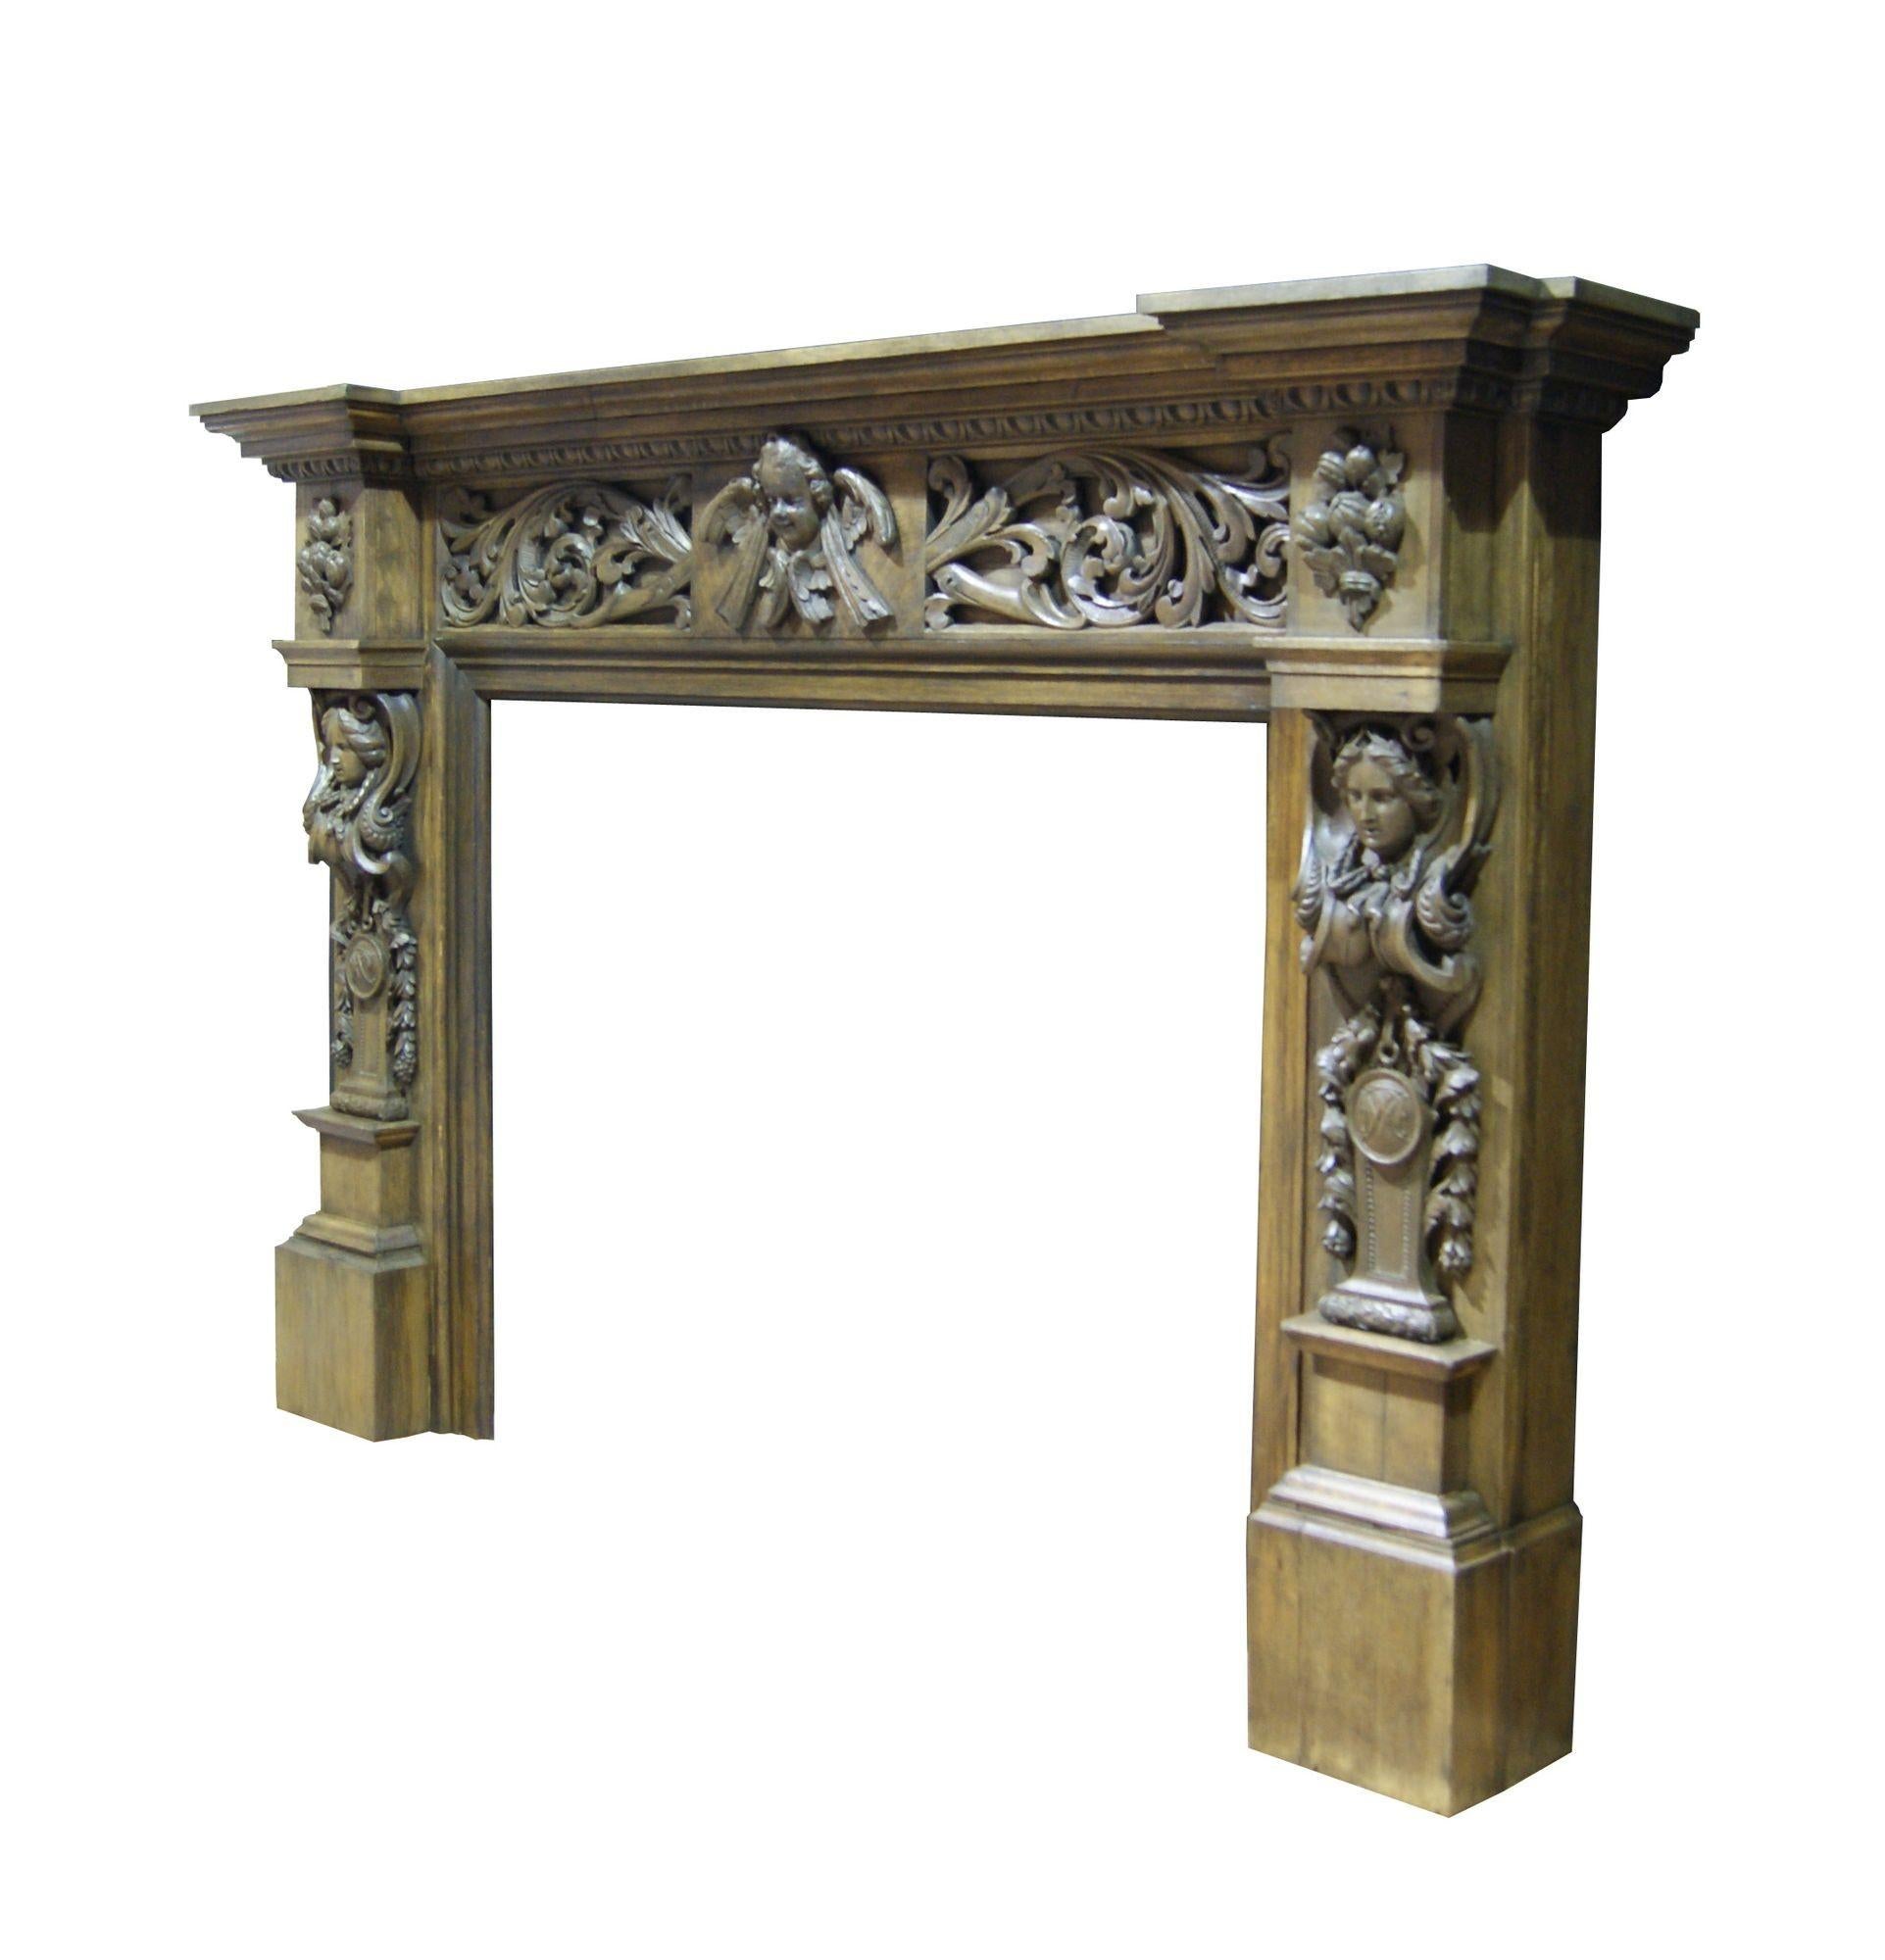 Hand-Crafted A Large and Imposing English Antique Oak Fireplace Mantel For Sale